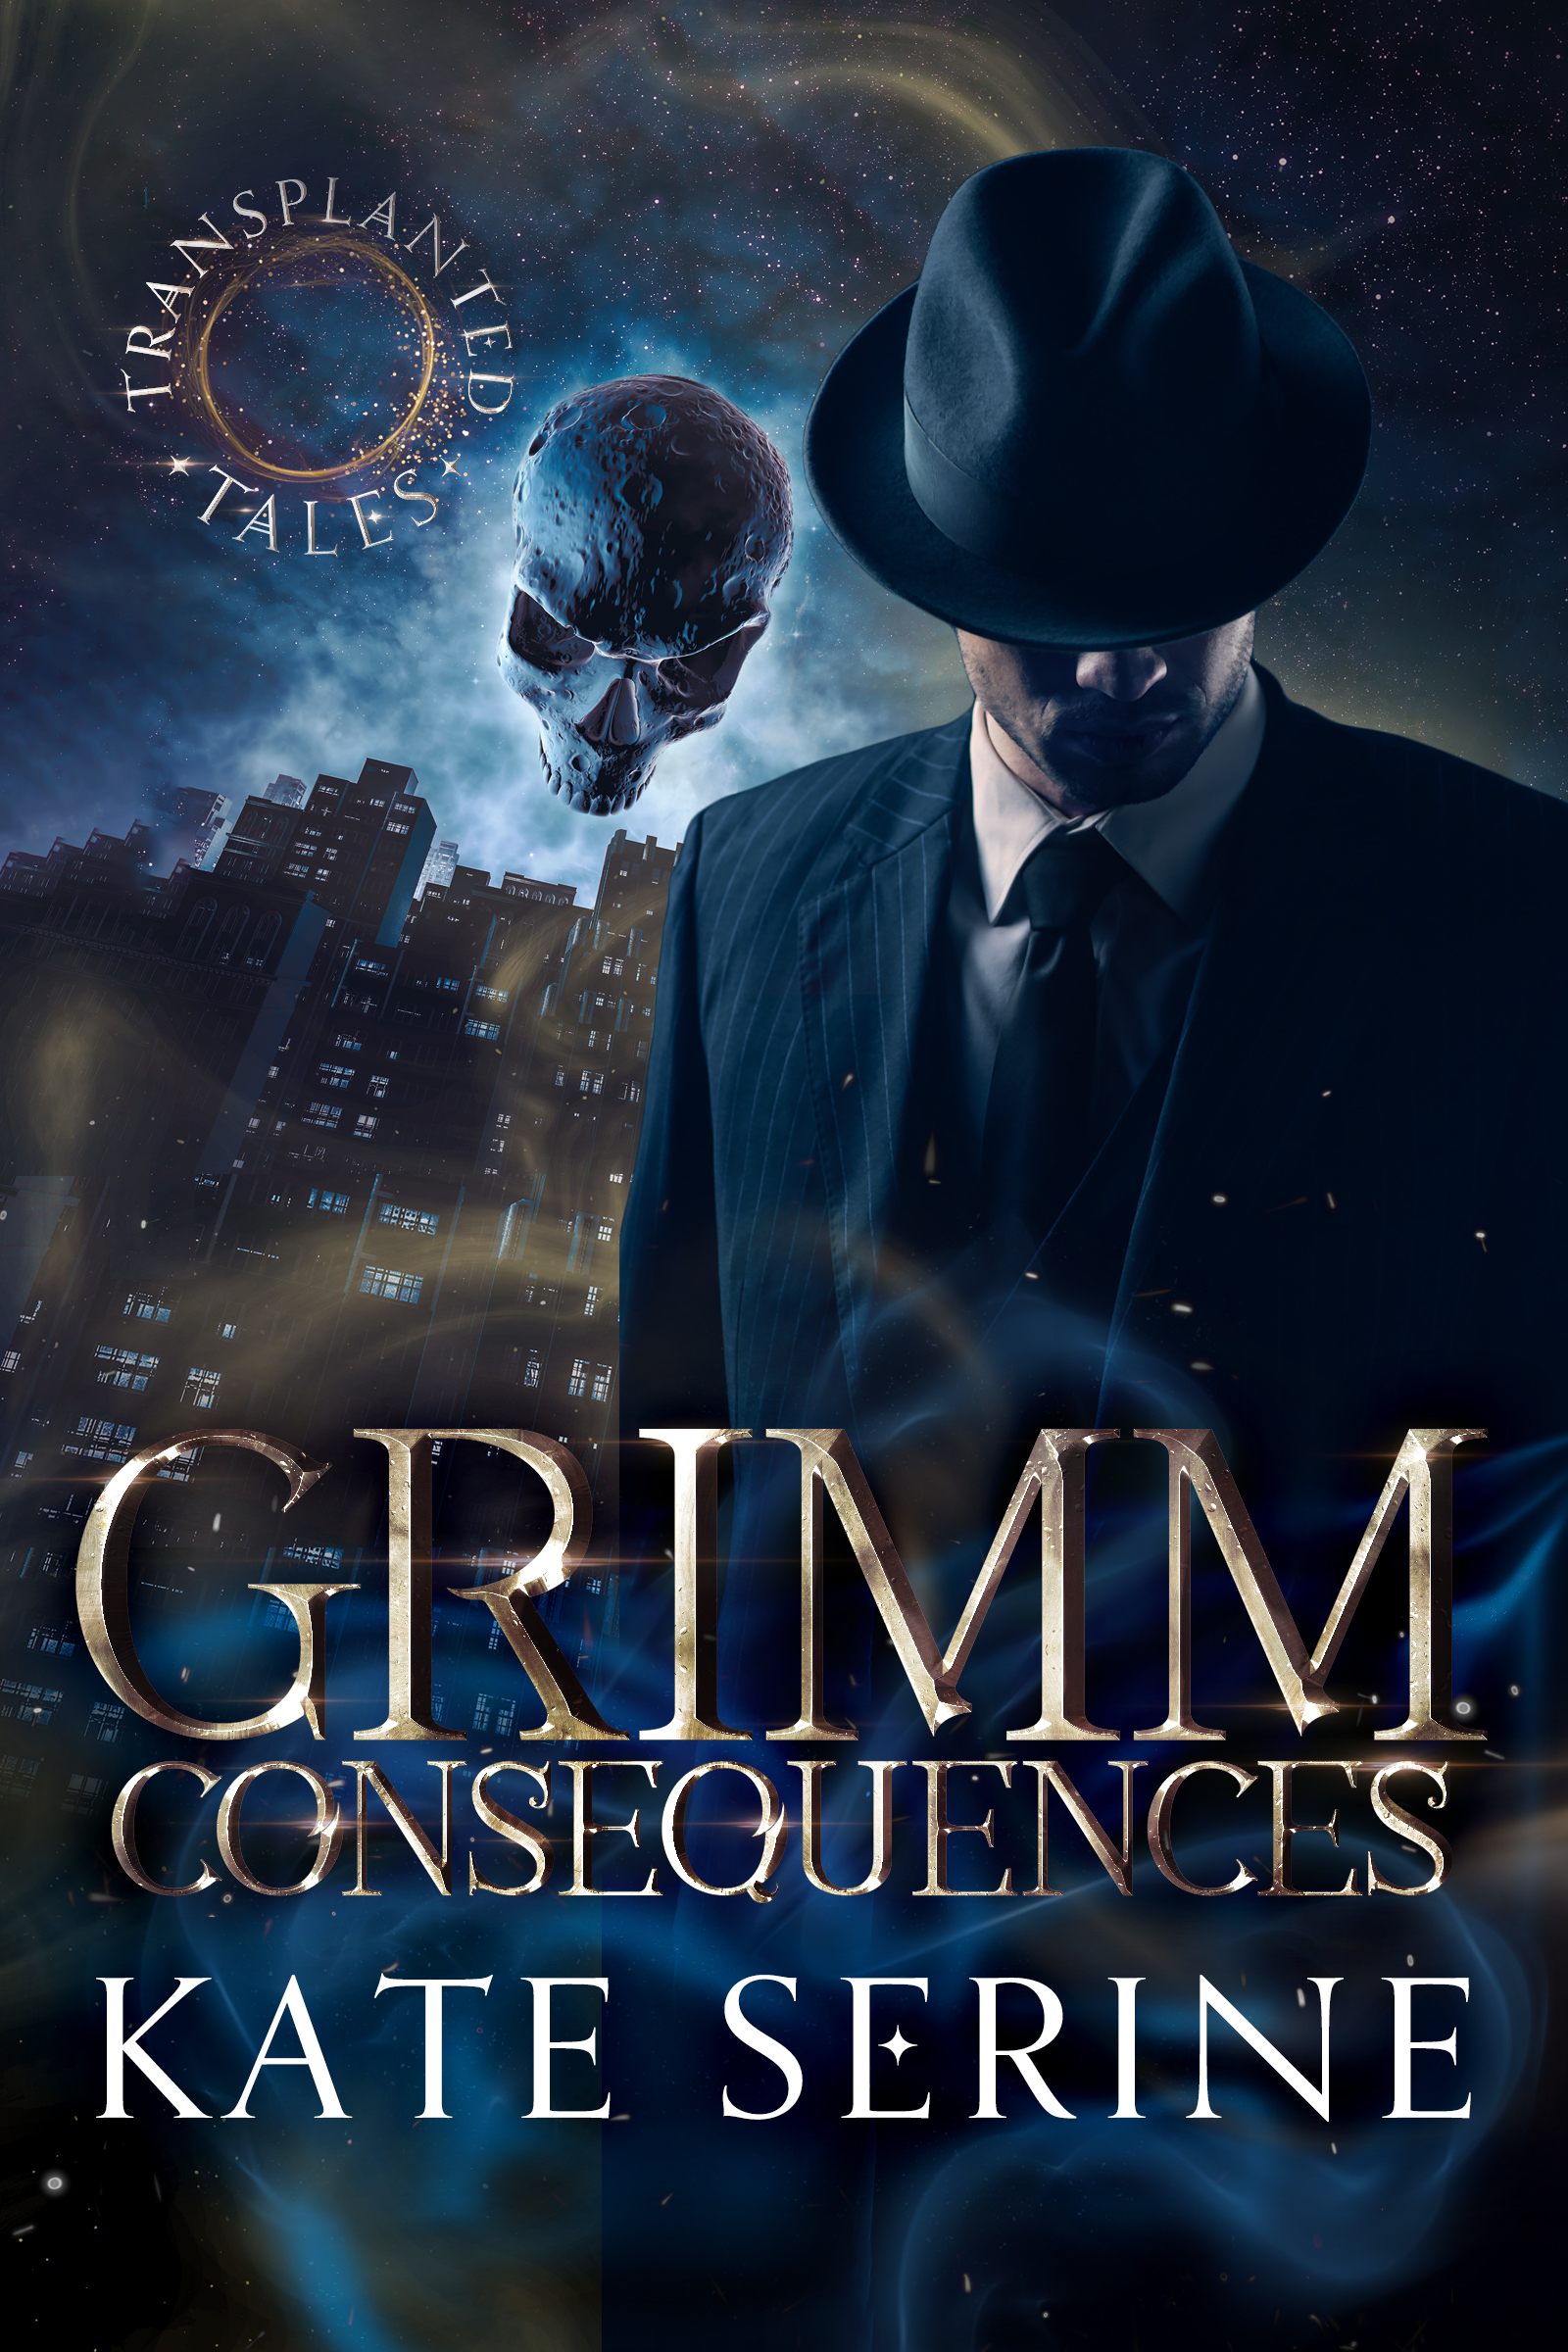 Grimm Consequences by Kate SeRine